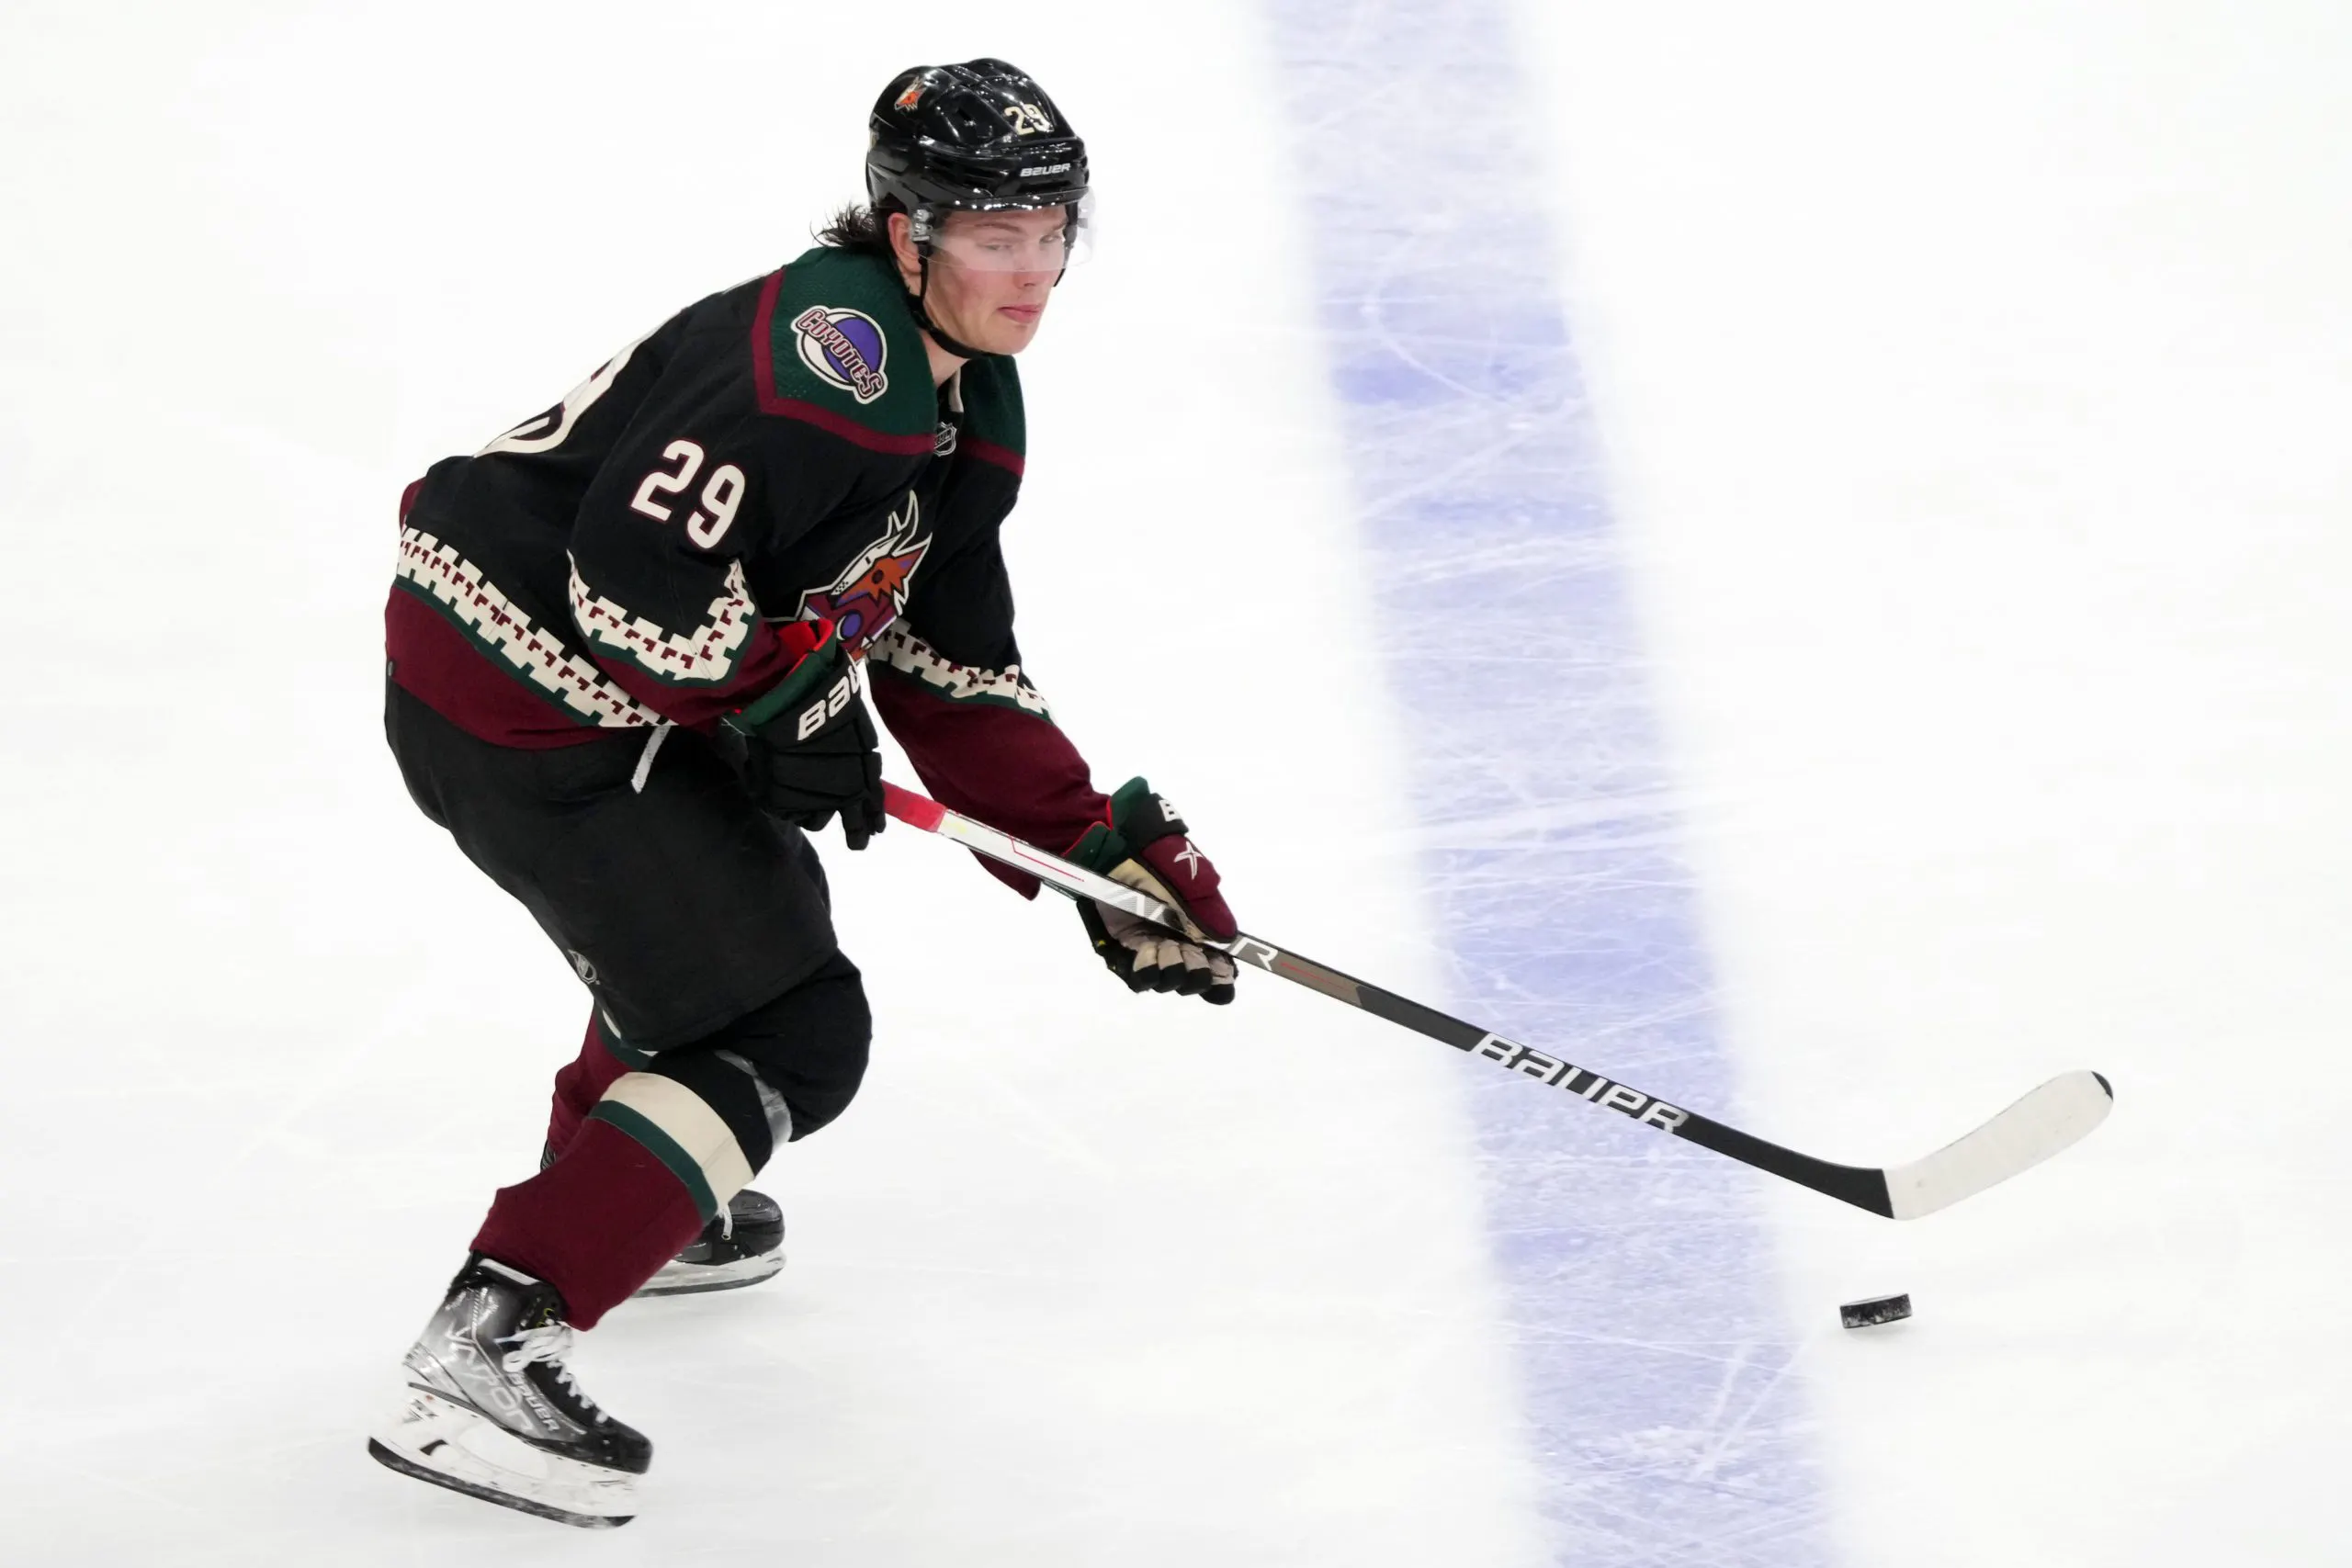 Arizona Coyotes sign Barrett Hayton to a two-year contract extension